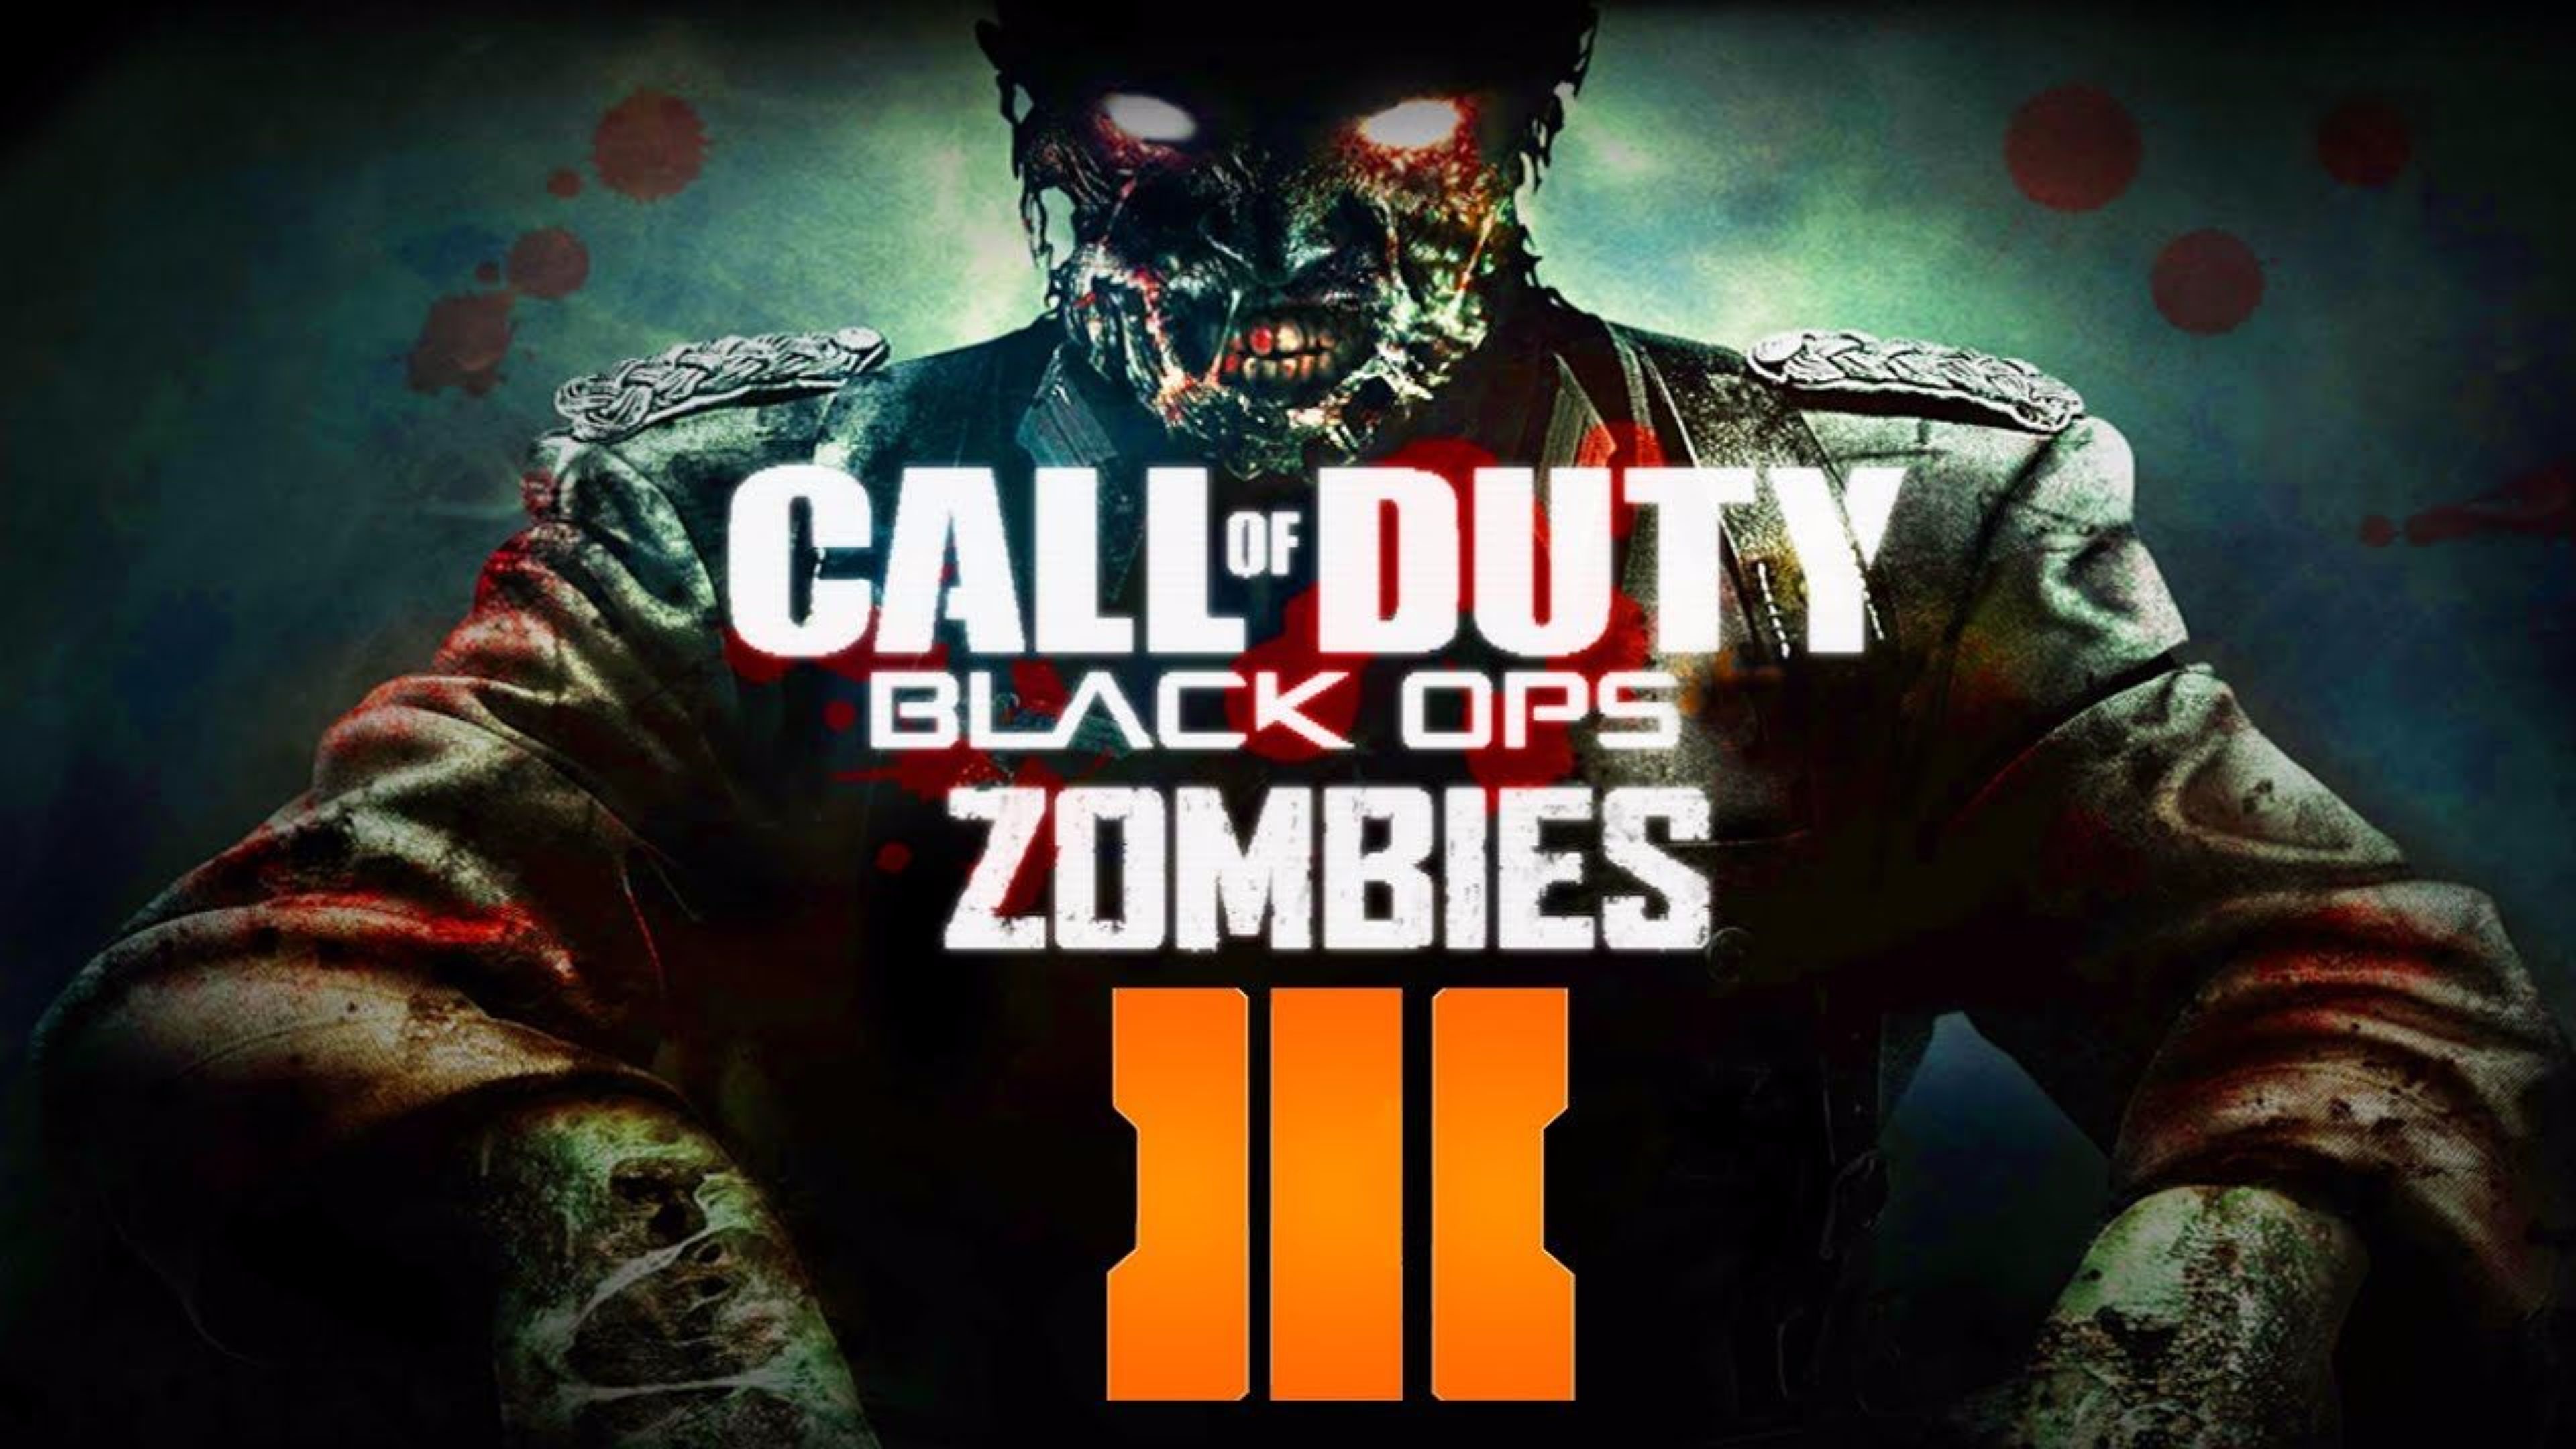 Zombies Call Of Duty Black Ops 3 Wallpaper - Call Of Duty Black Ops 3 Wallpaper Zombies - HD Wallpaper 